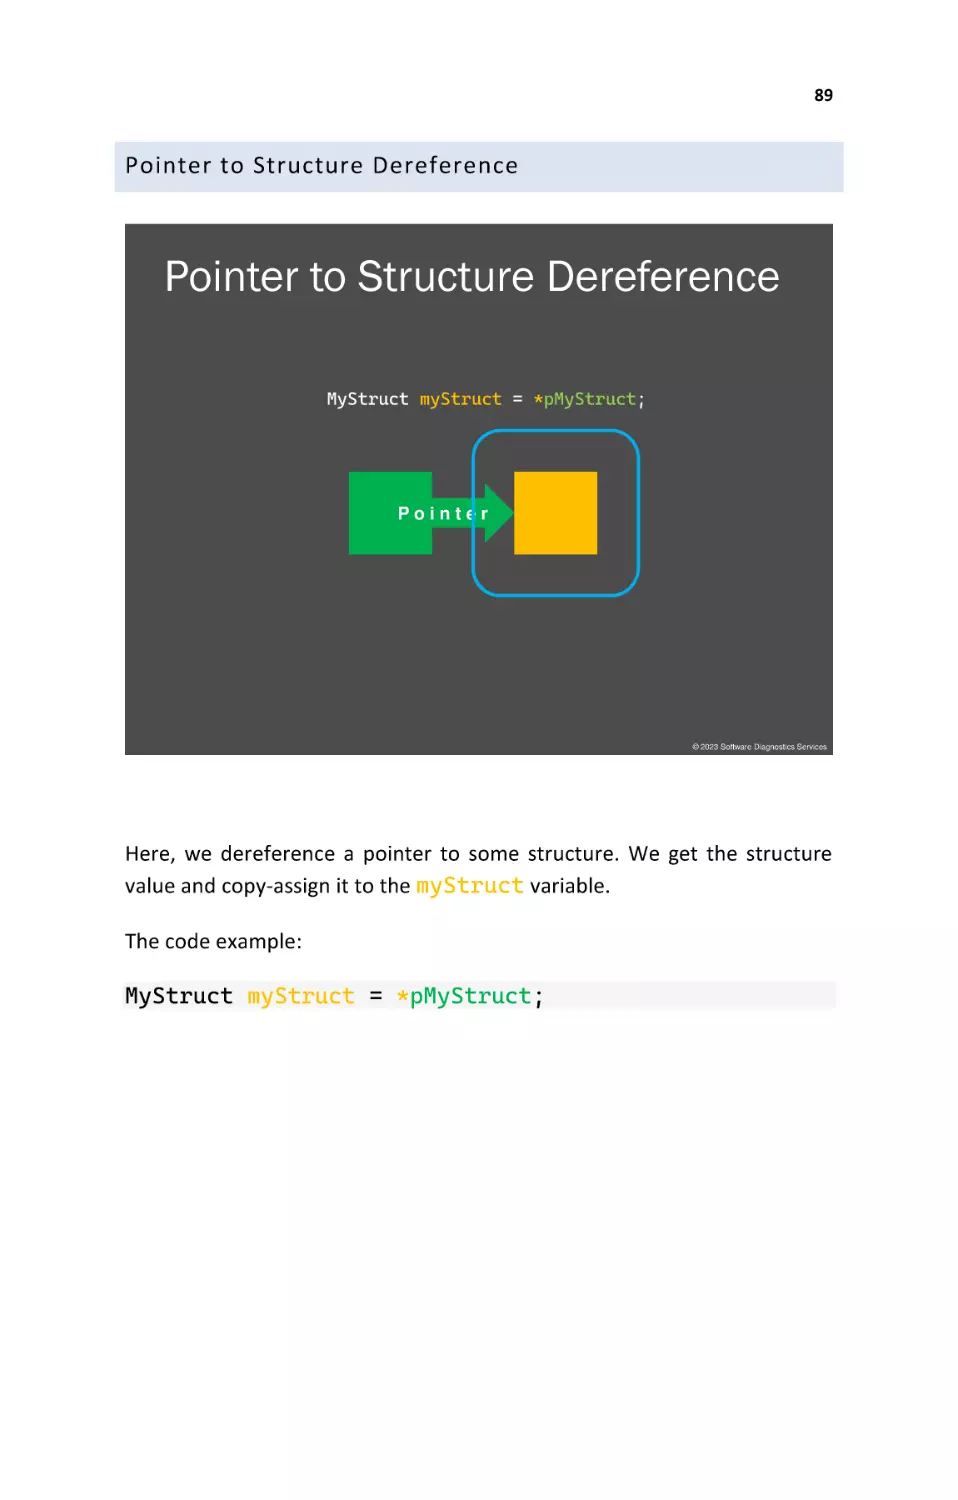 Pointer to Structure Dereference